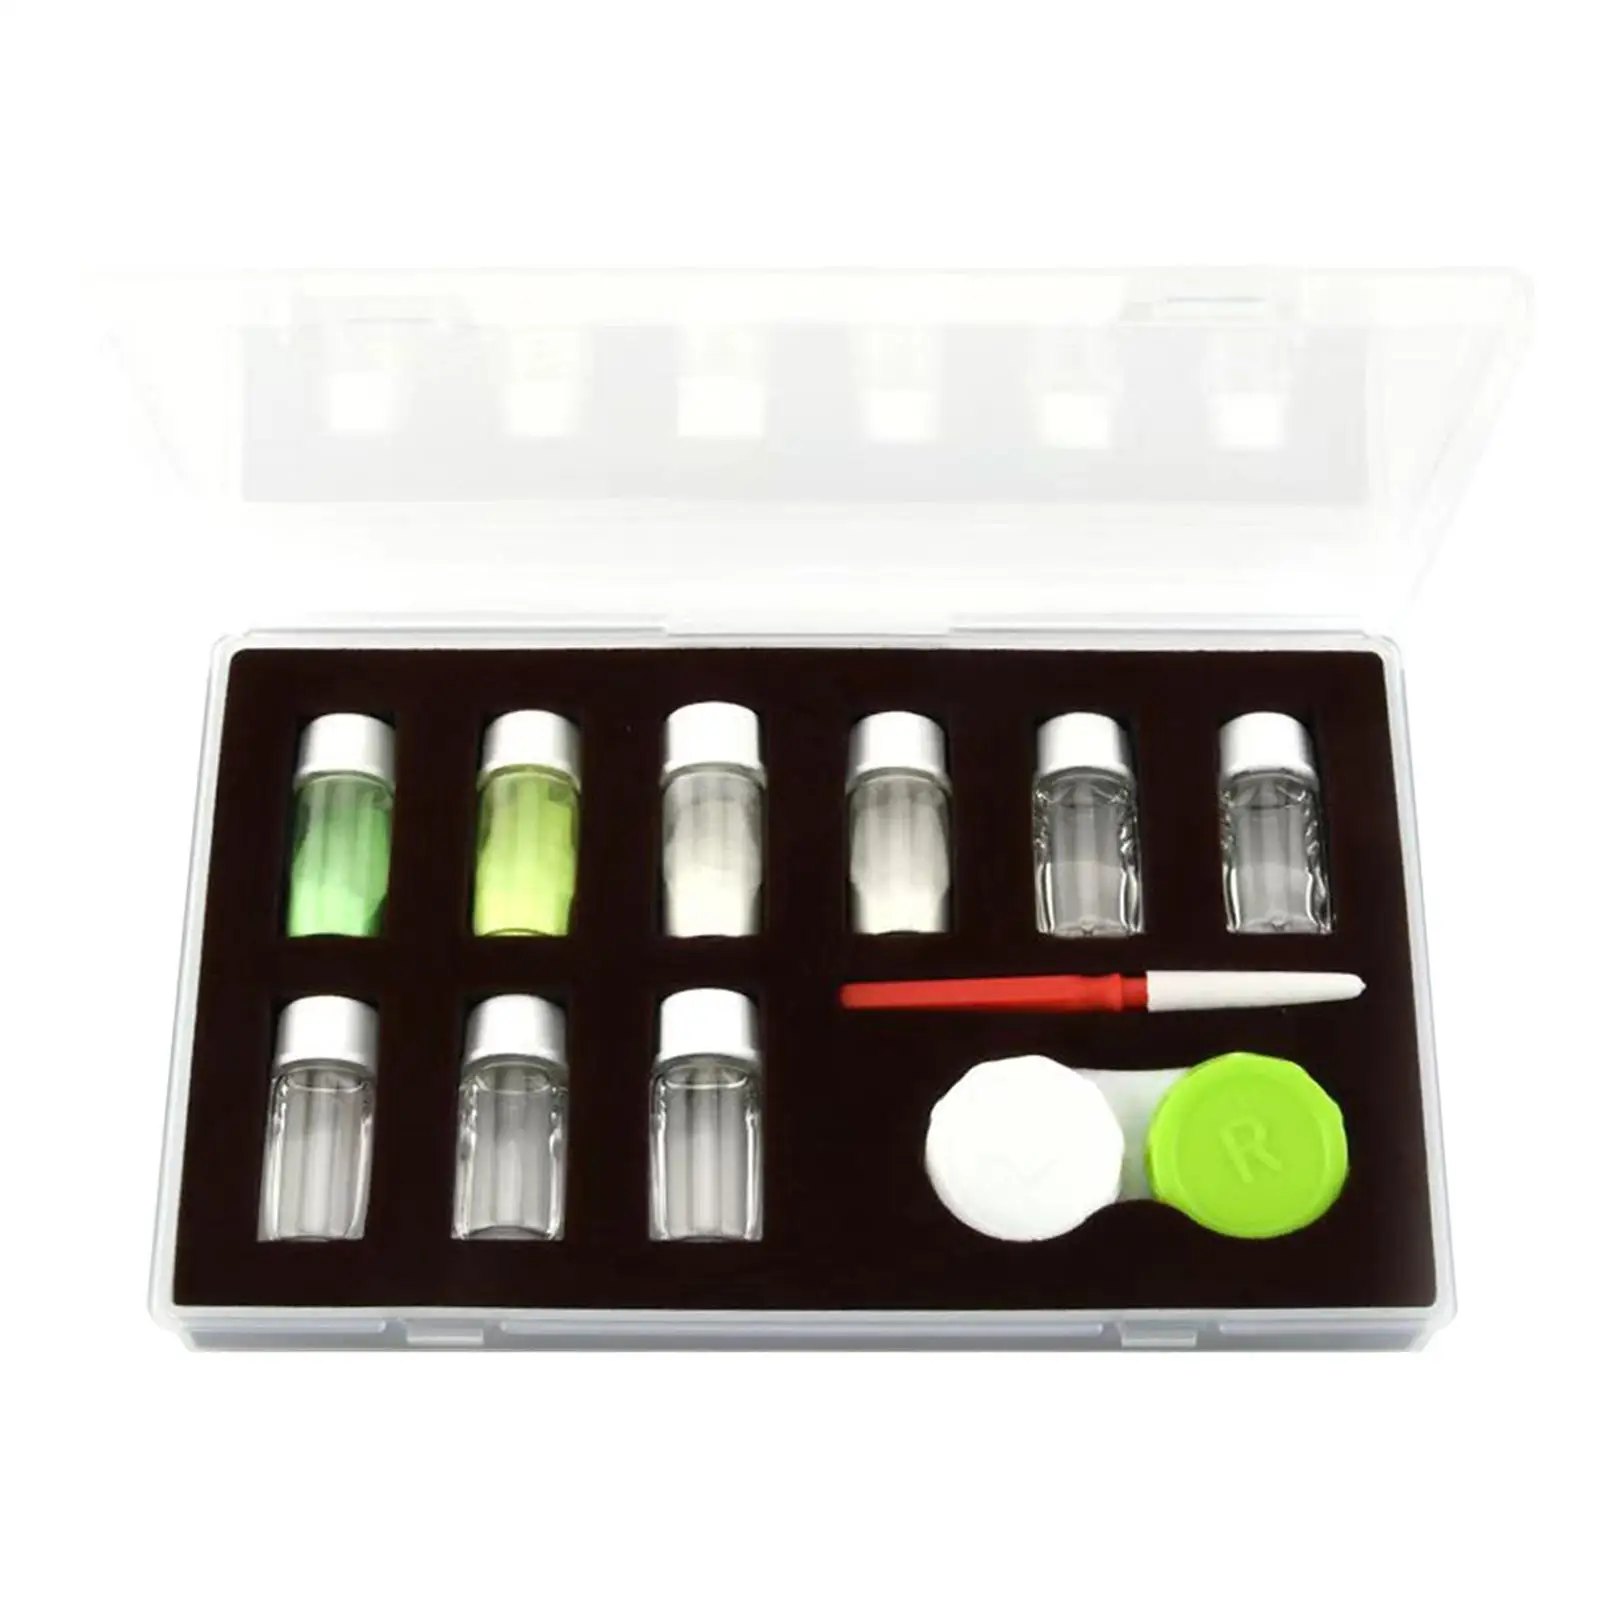 Watch Luminous Powder Set Easy to Carry Repair Tool 4 Colors Watch Fluorescent Powder Set for Watchmaker Repair Jewelry Home Use